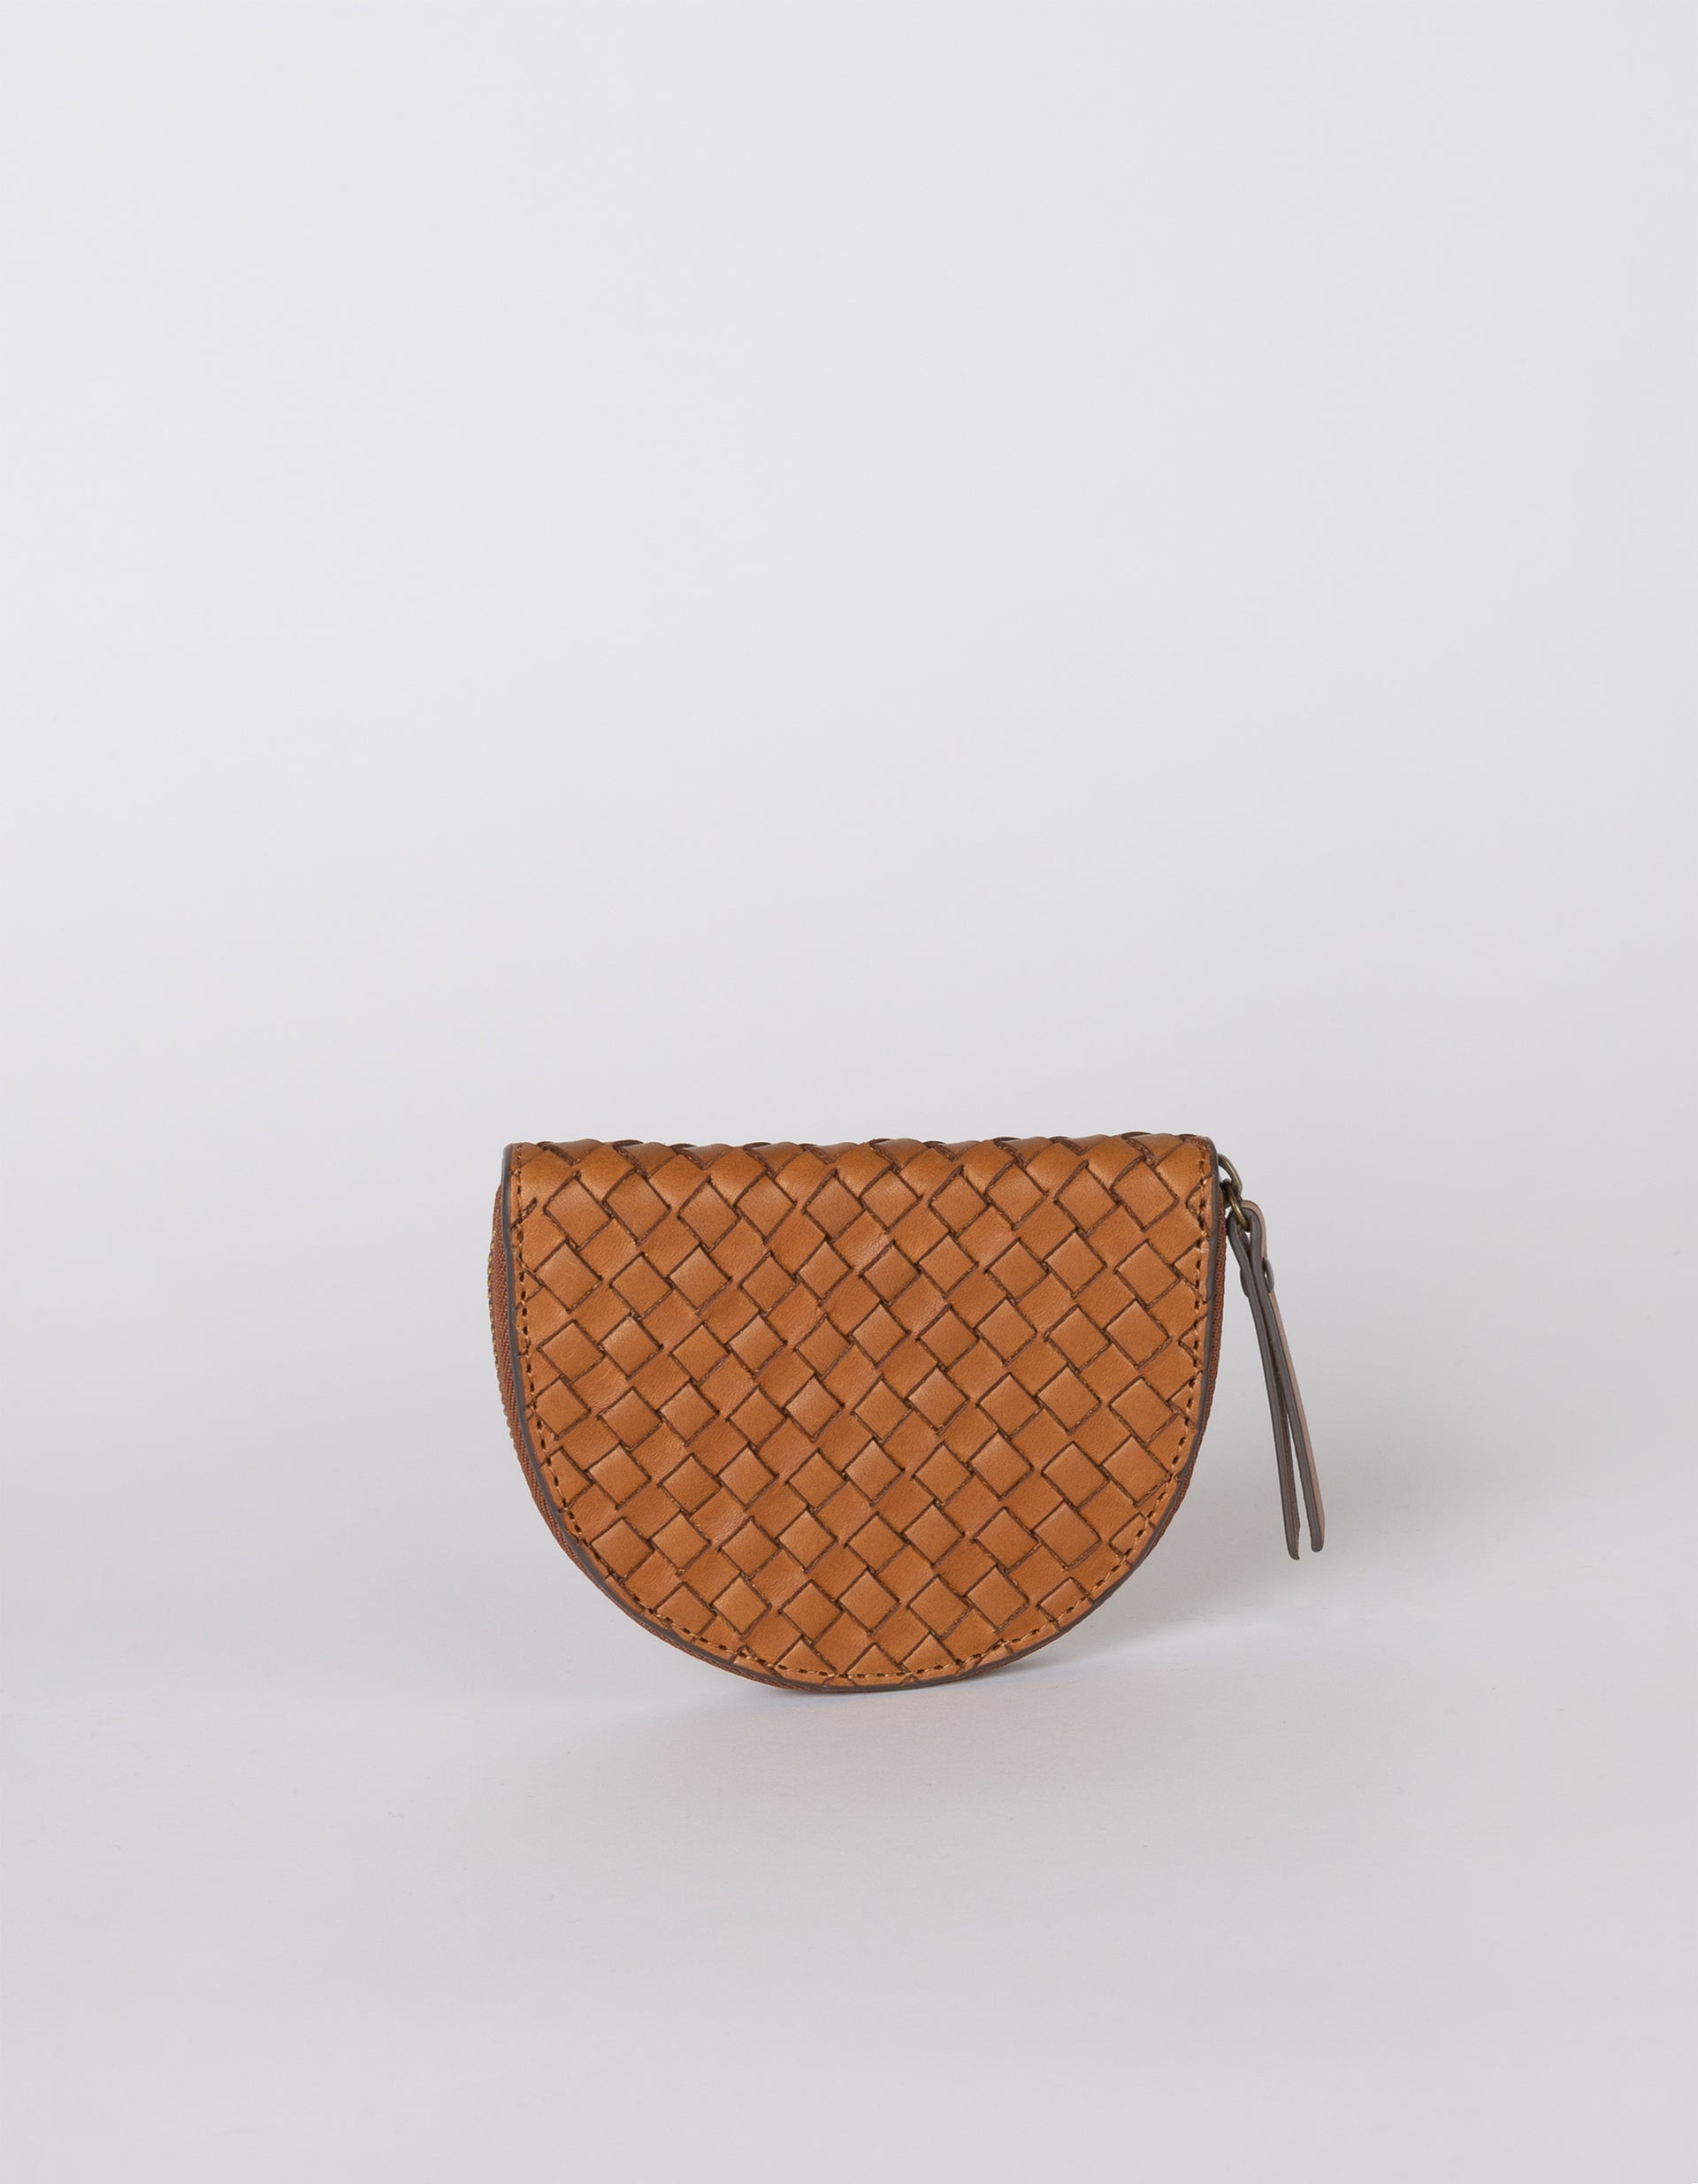 Laura Coin Purse - Cognac Woven Classic Leather